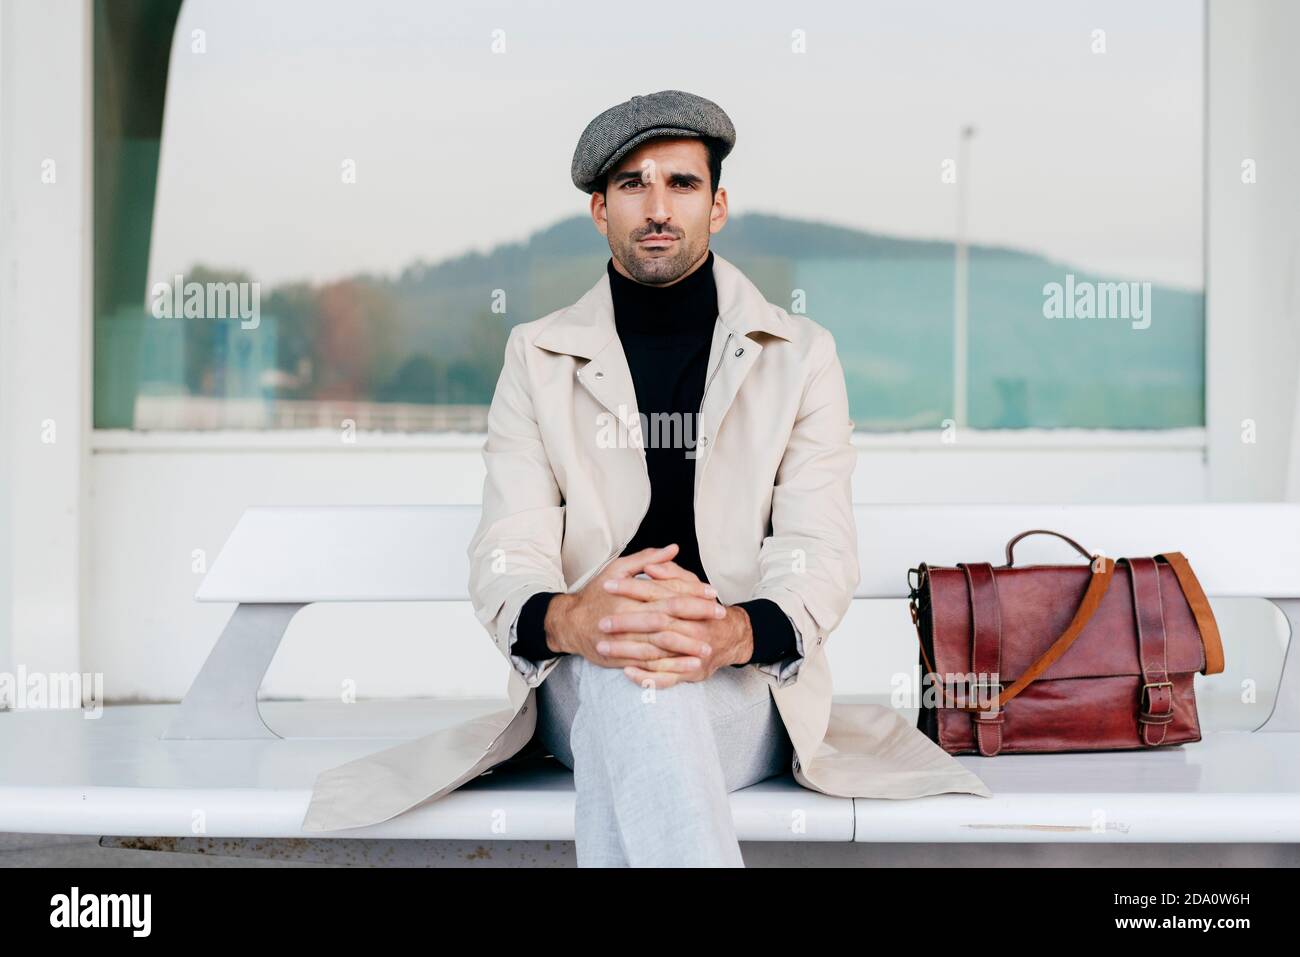 Confident man with beard in trendy clothes sitting on white bench with bag and looking at camera against modern building with big window Stock Photo